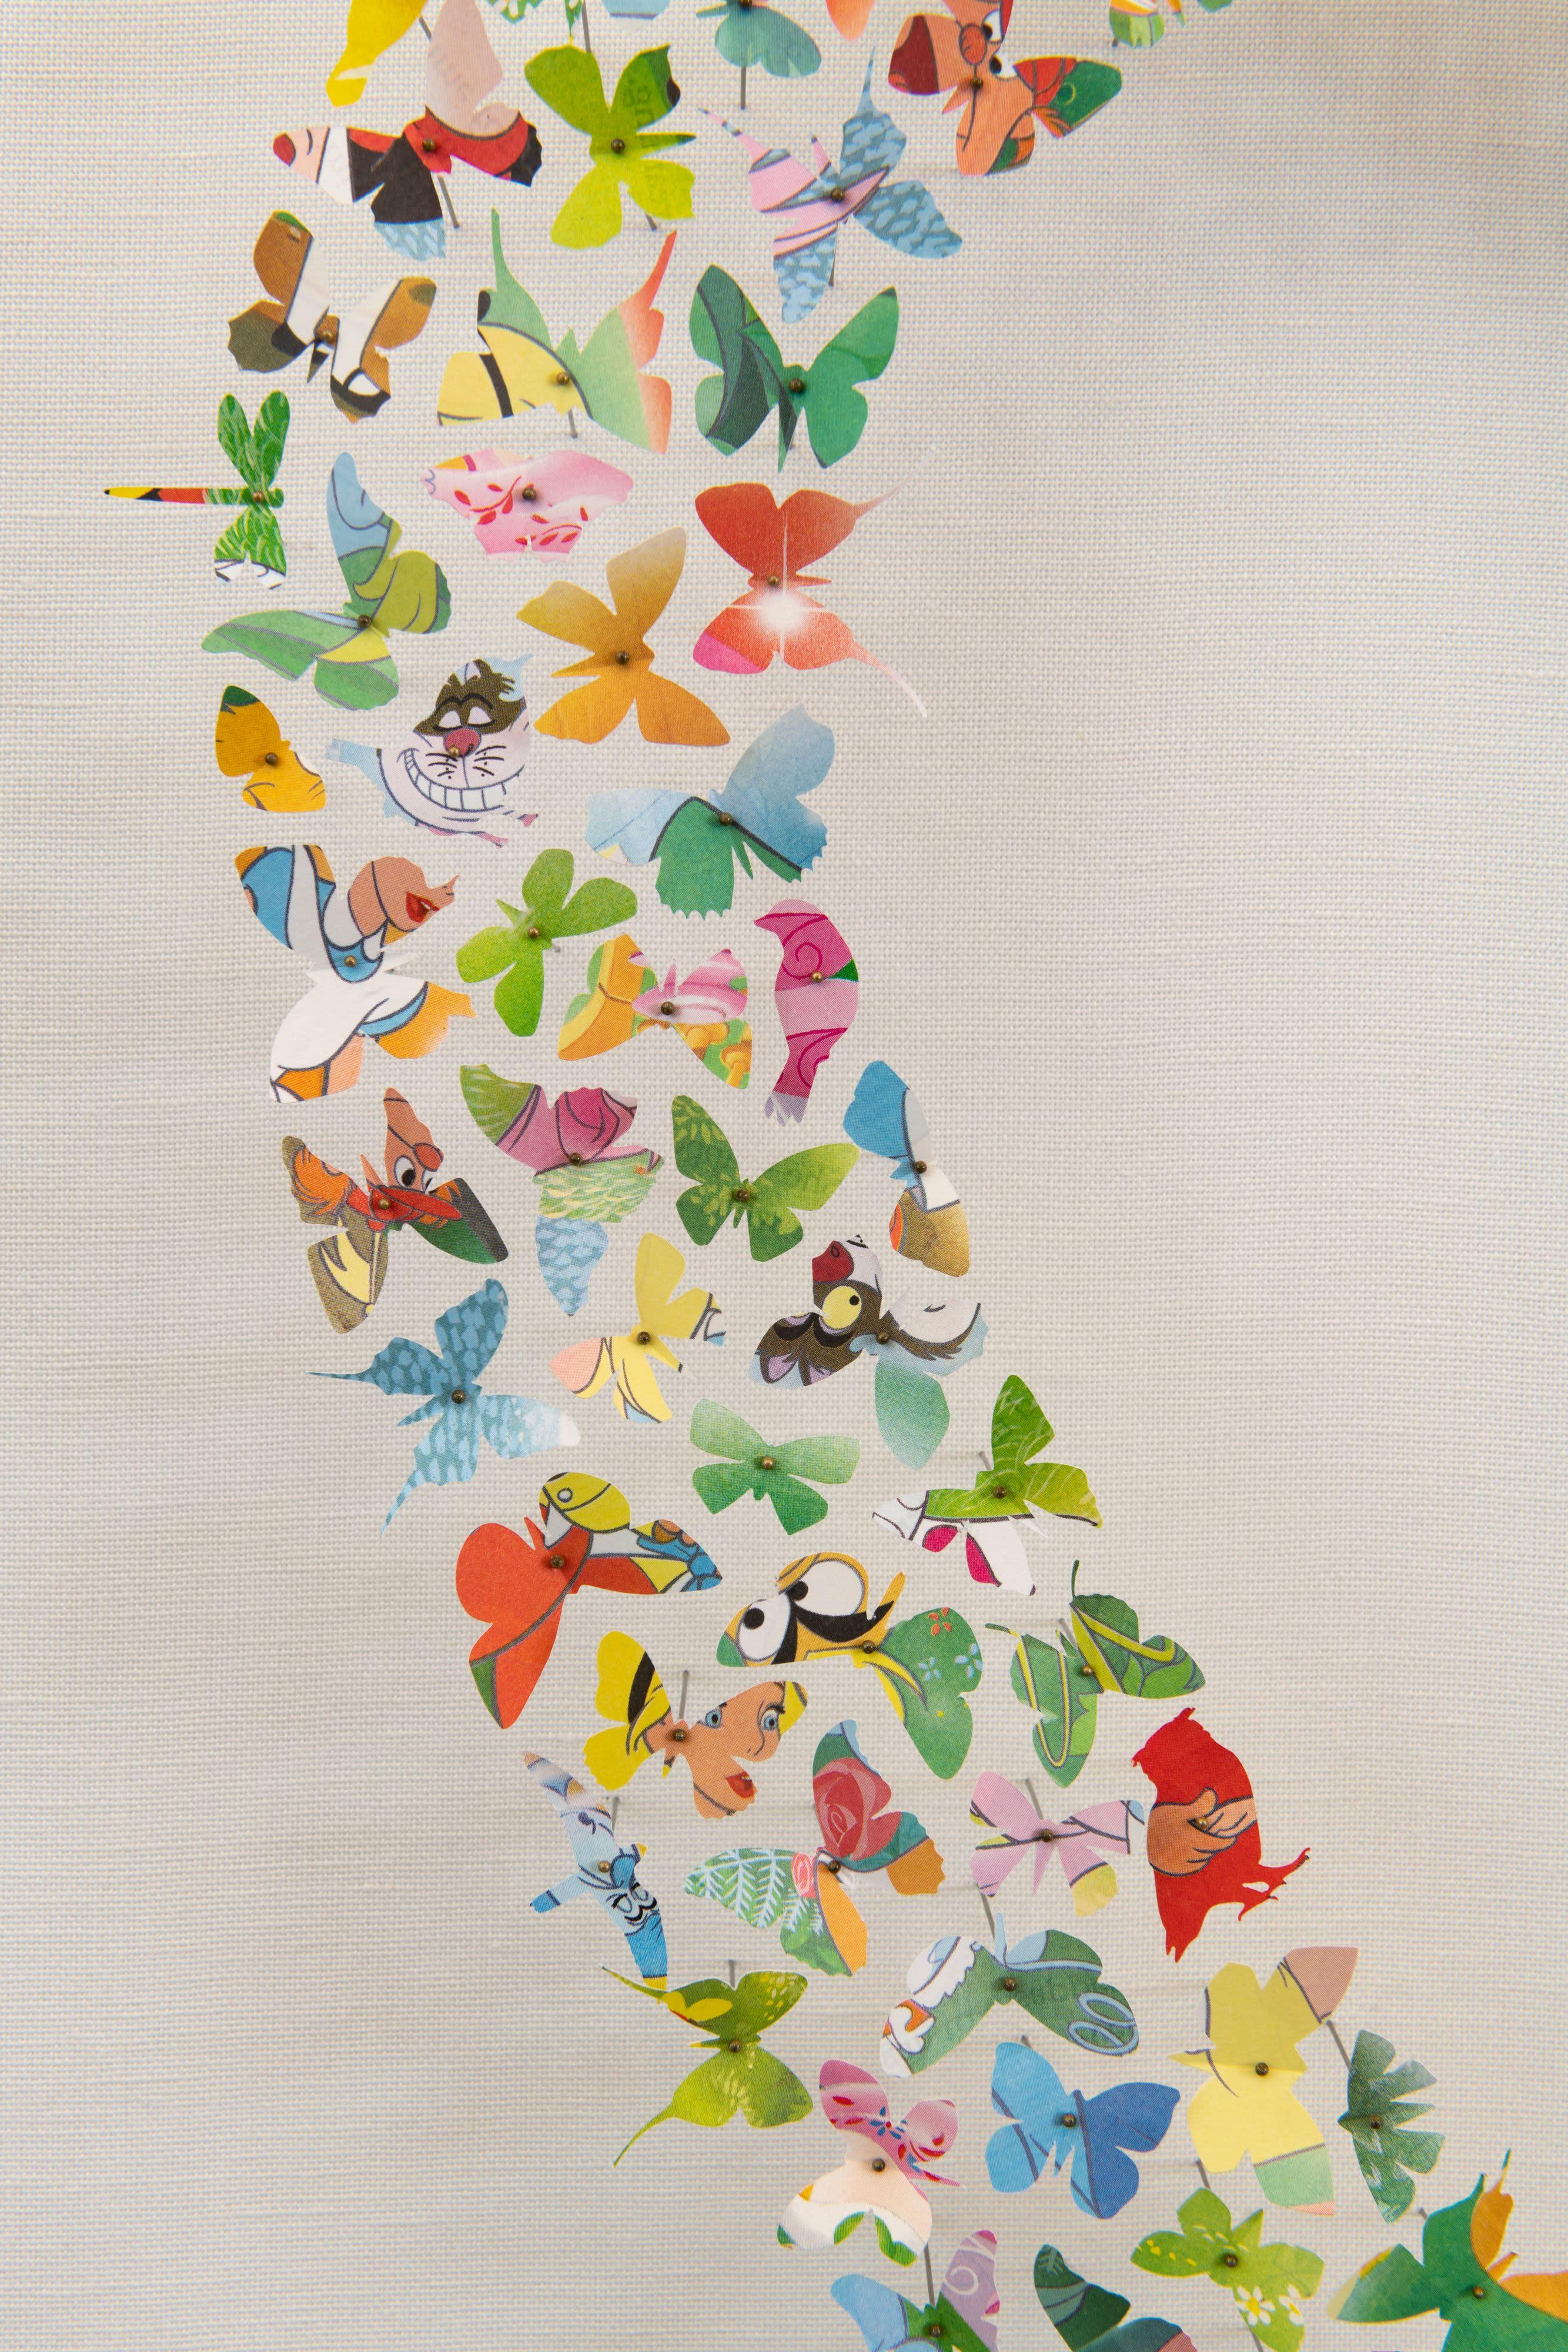 Charles Patrick
Stay On the Path, 2022
30 x 30 inches
Mixed Media - Cut butterflies arranged with entomology pins
This piece is unique
Signed by artist

Currently on display at Art Angels Los Angeles